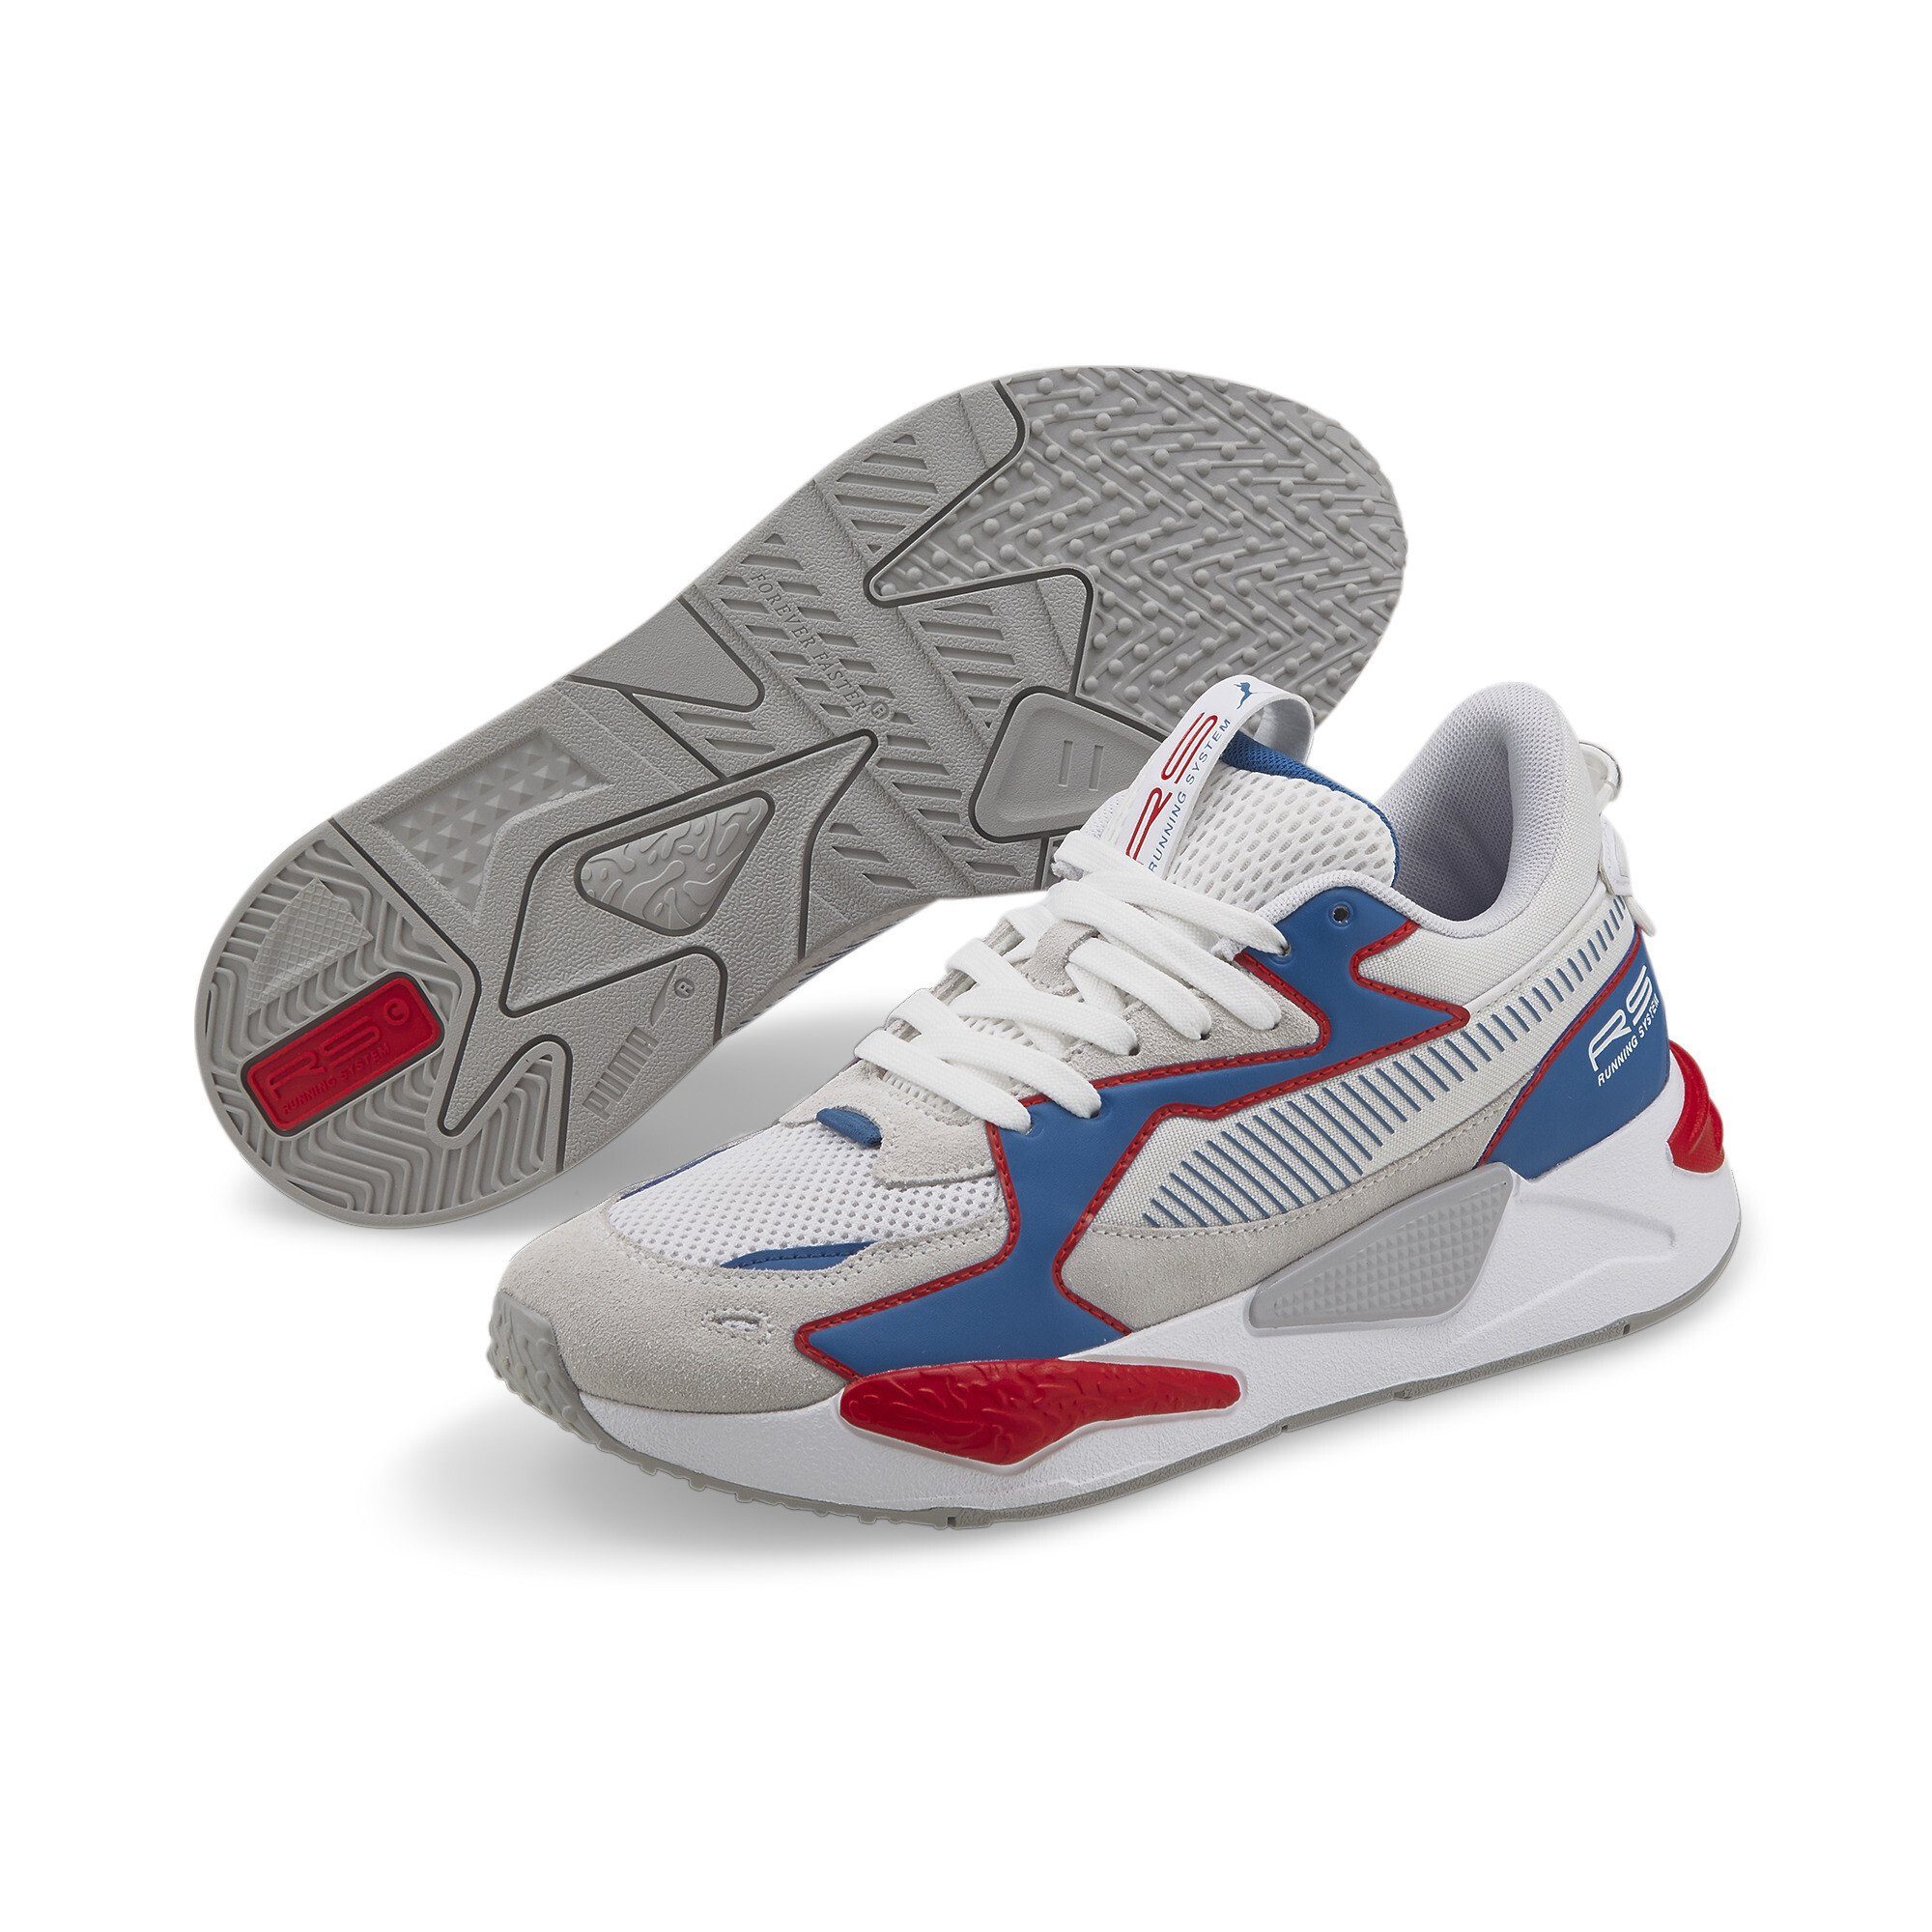 PUMA »RS-Z Outline Sneakers« Sneaker online kaufen | OTTO